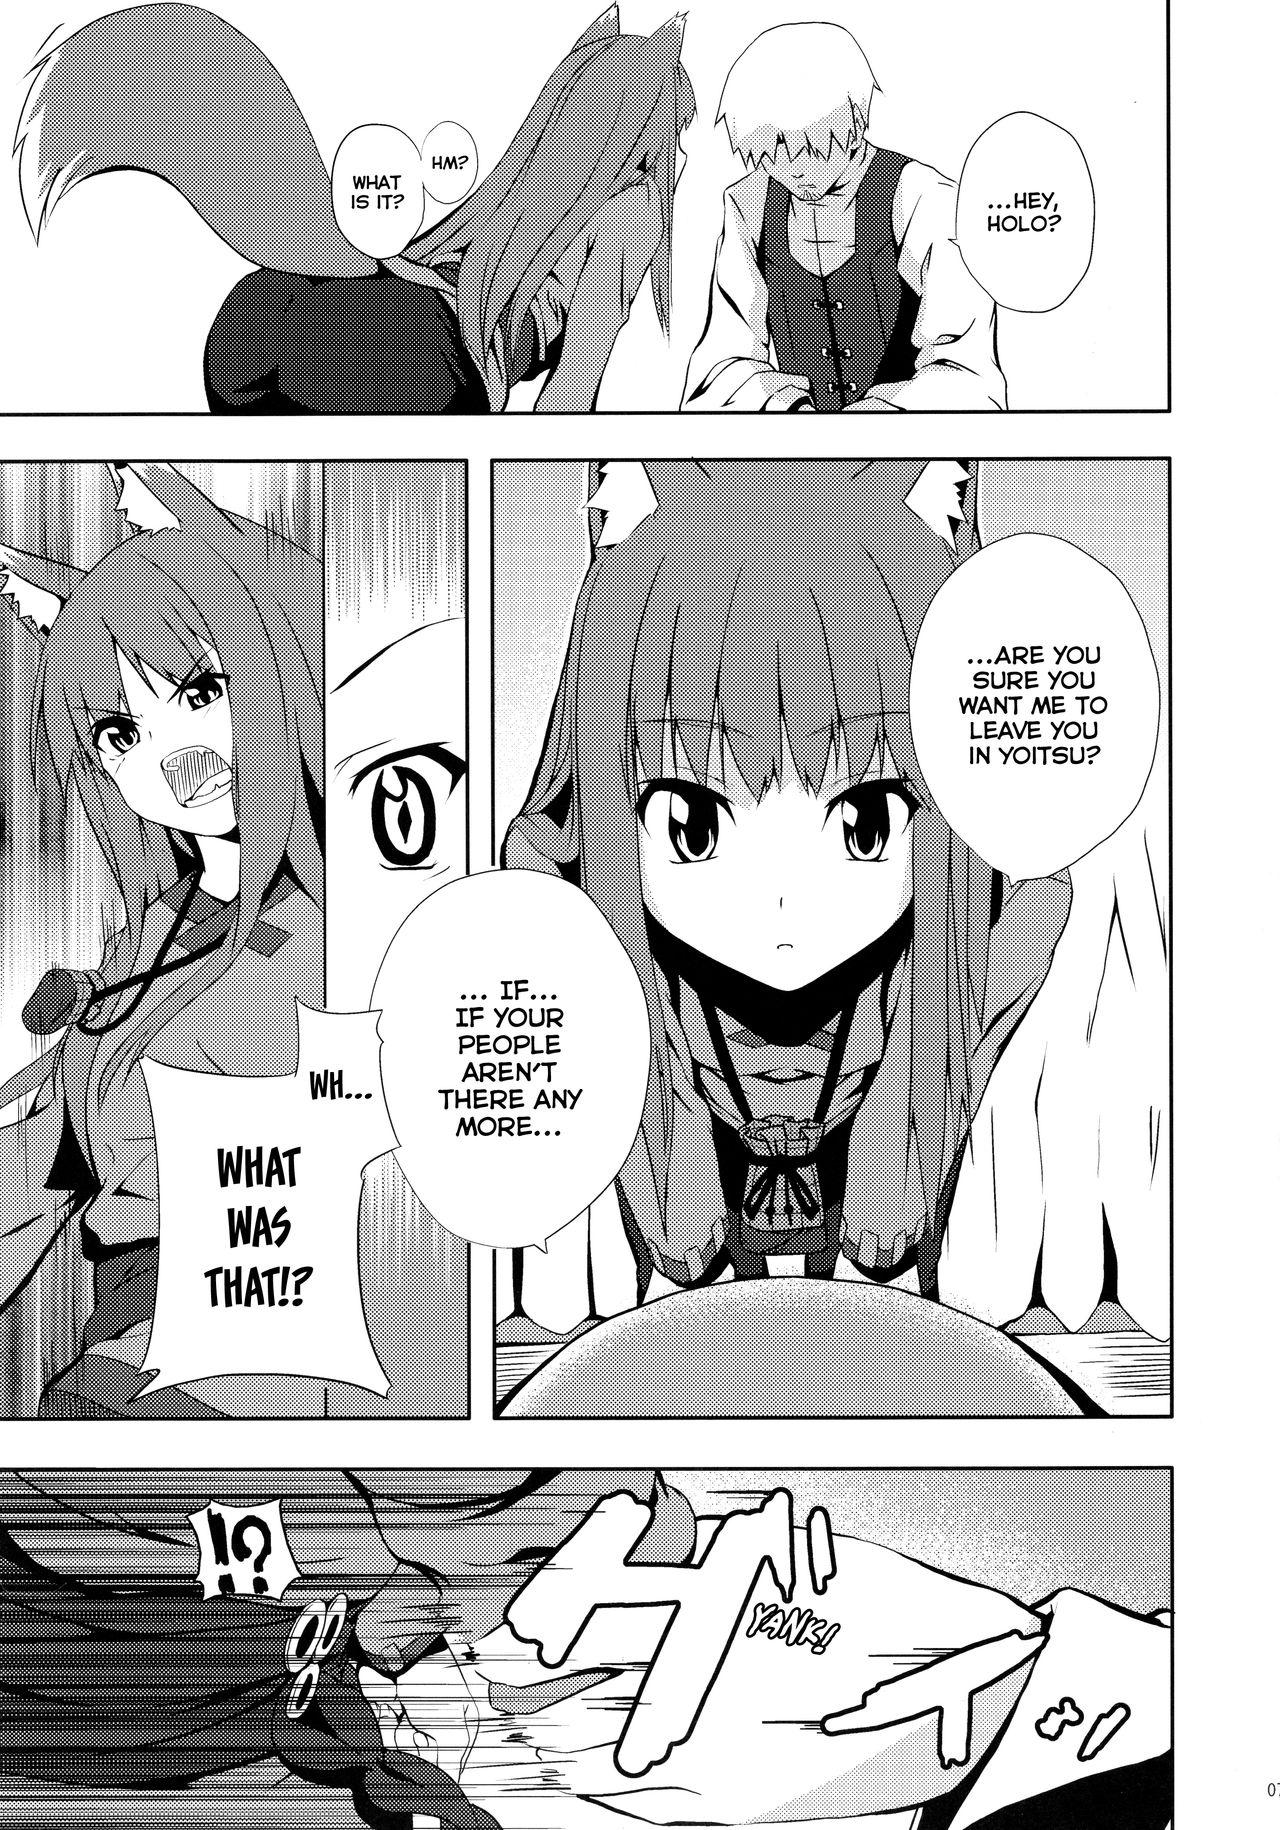 Style Bitter Apple - Spice and wolf Two - Page 7